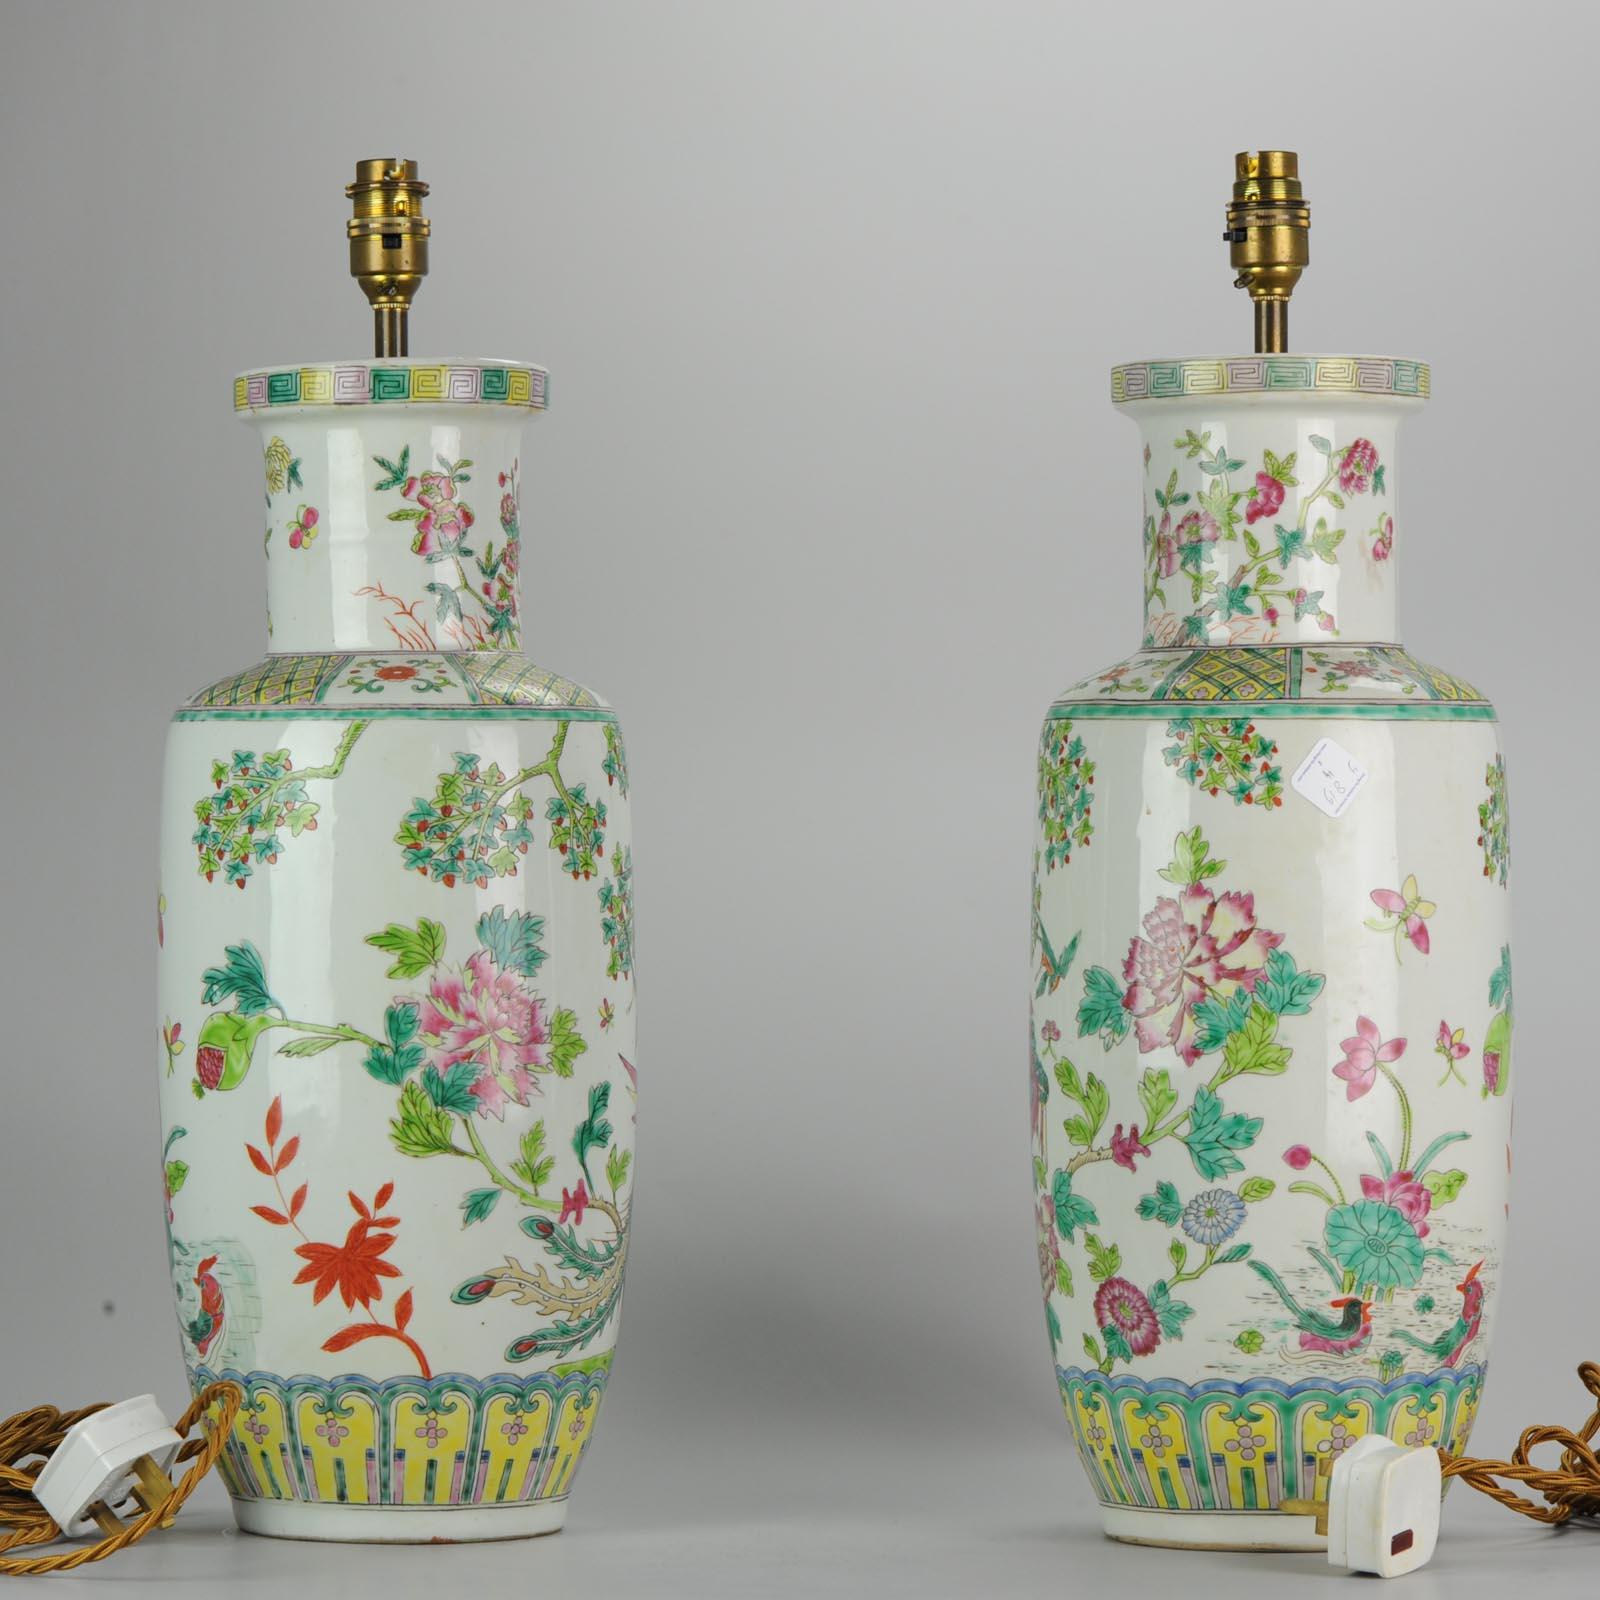 20th Century Chinese Porcelain Vases PRoC Lamp Fenghuang Bird Vases Roses, Pair For Sale 1